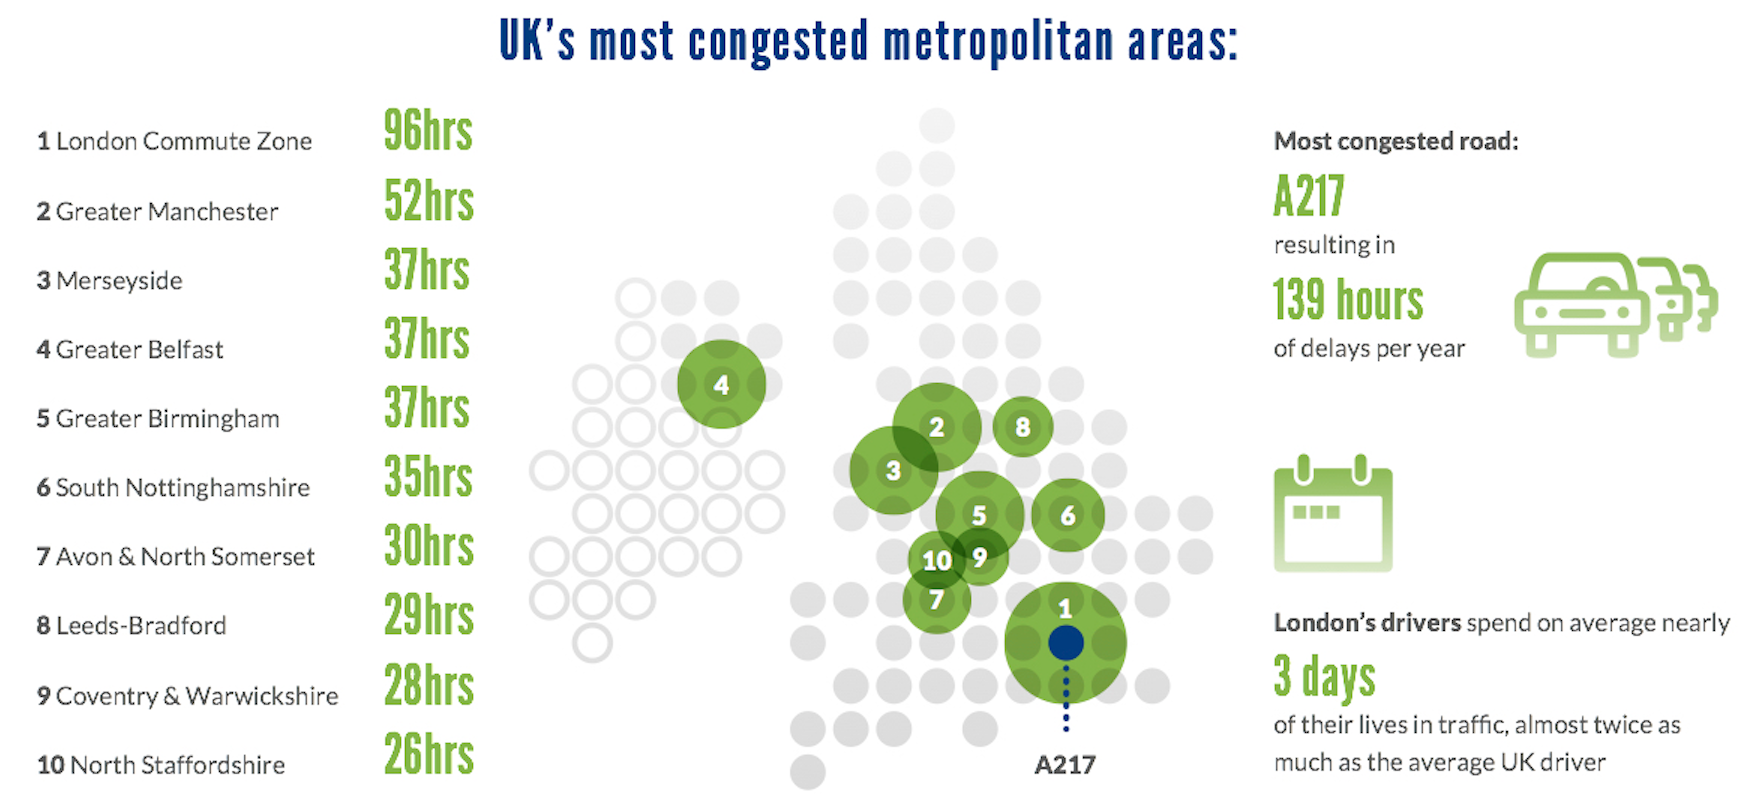 UK most congested areas